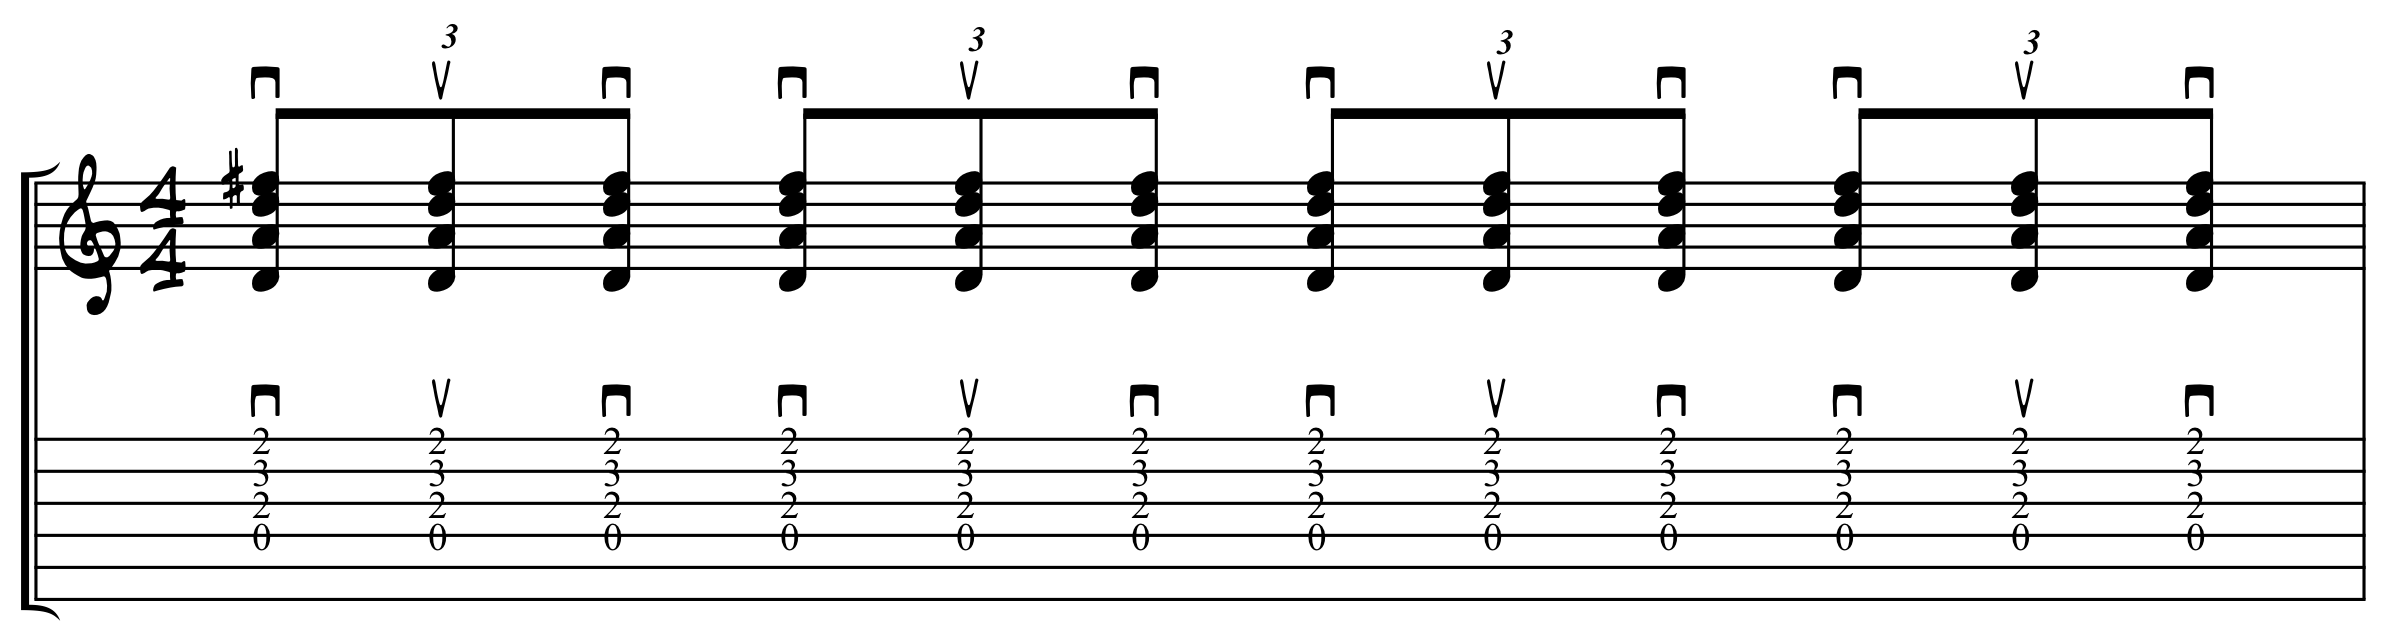 Eighth Note Triplet Strums Downstroke on Beat